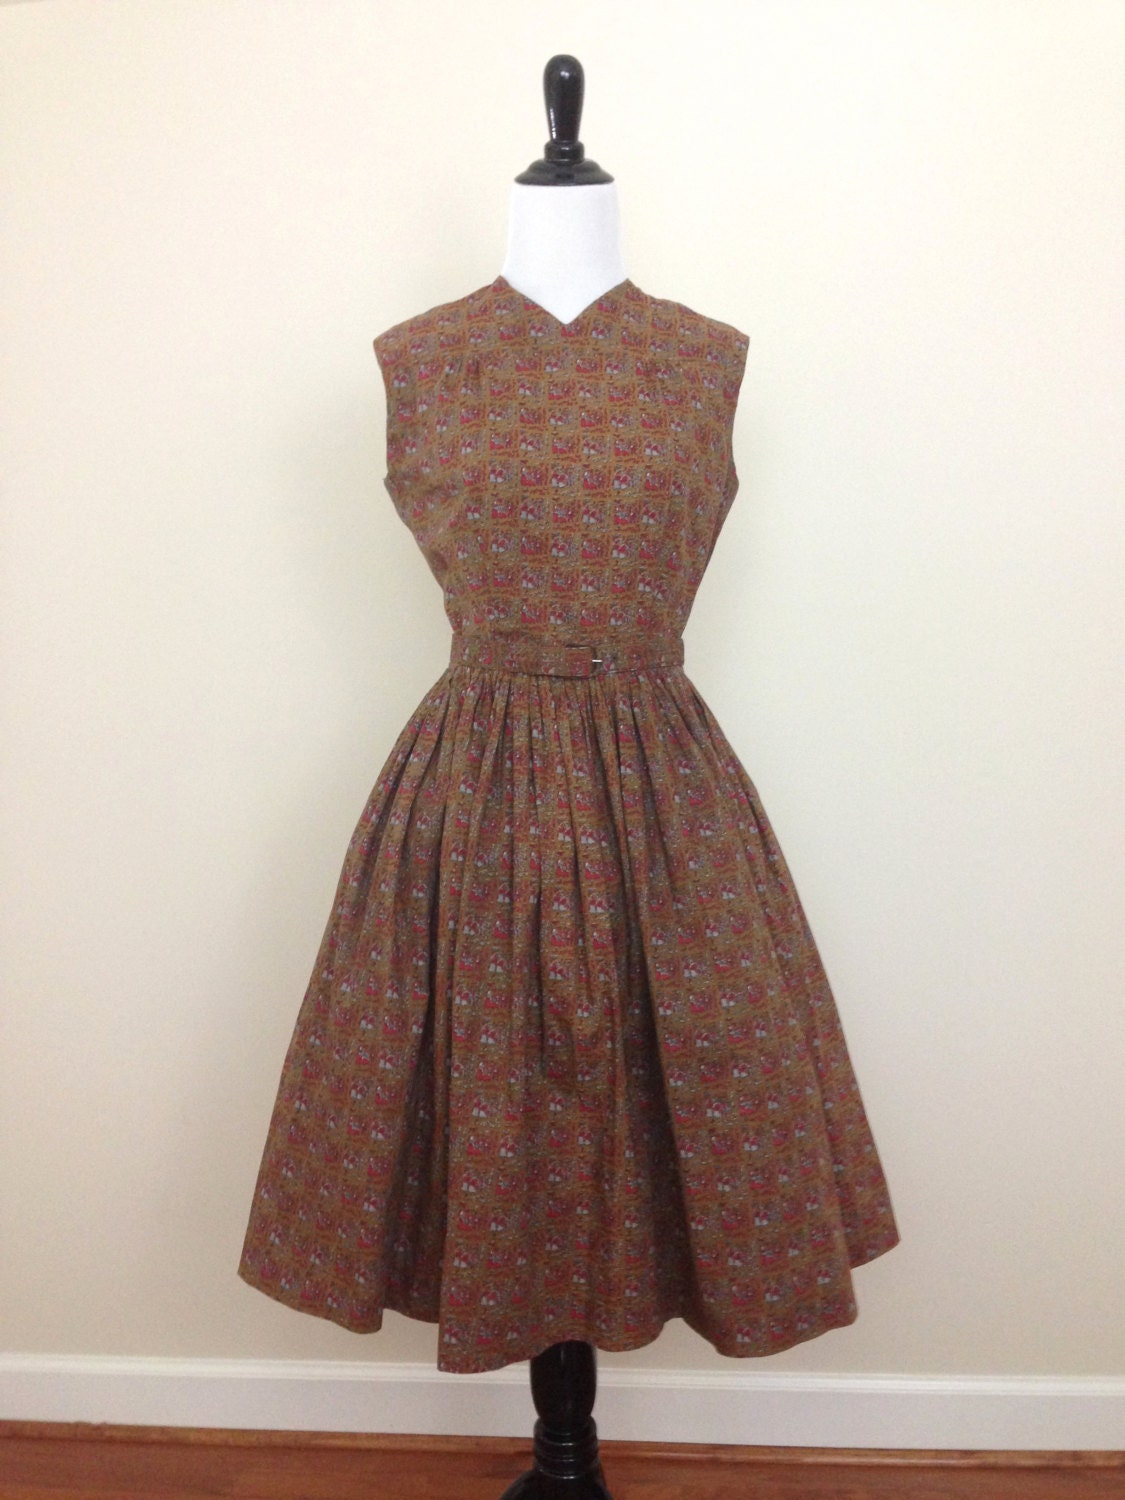 SALE 50s Nelly Don Dress 1950's Sleeveless Dress with